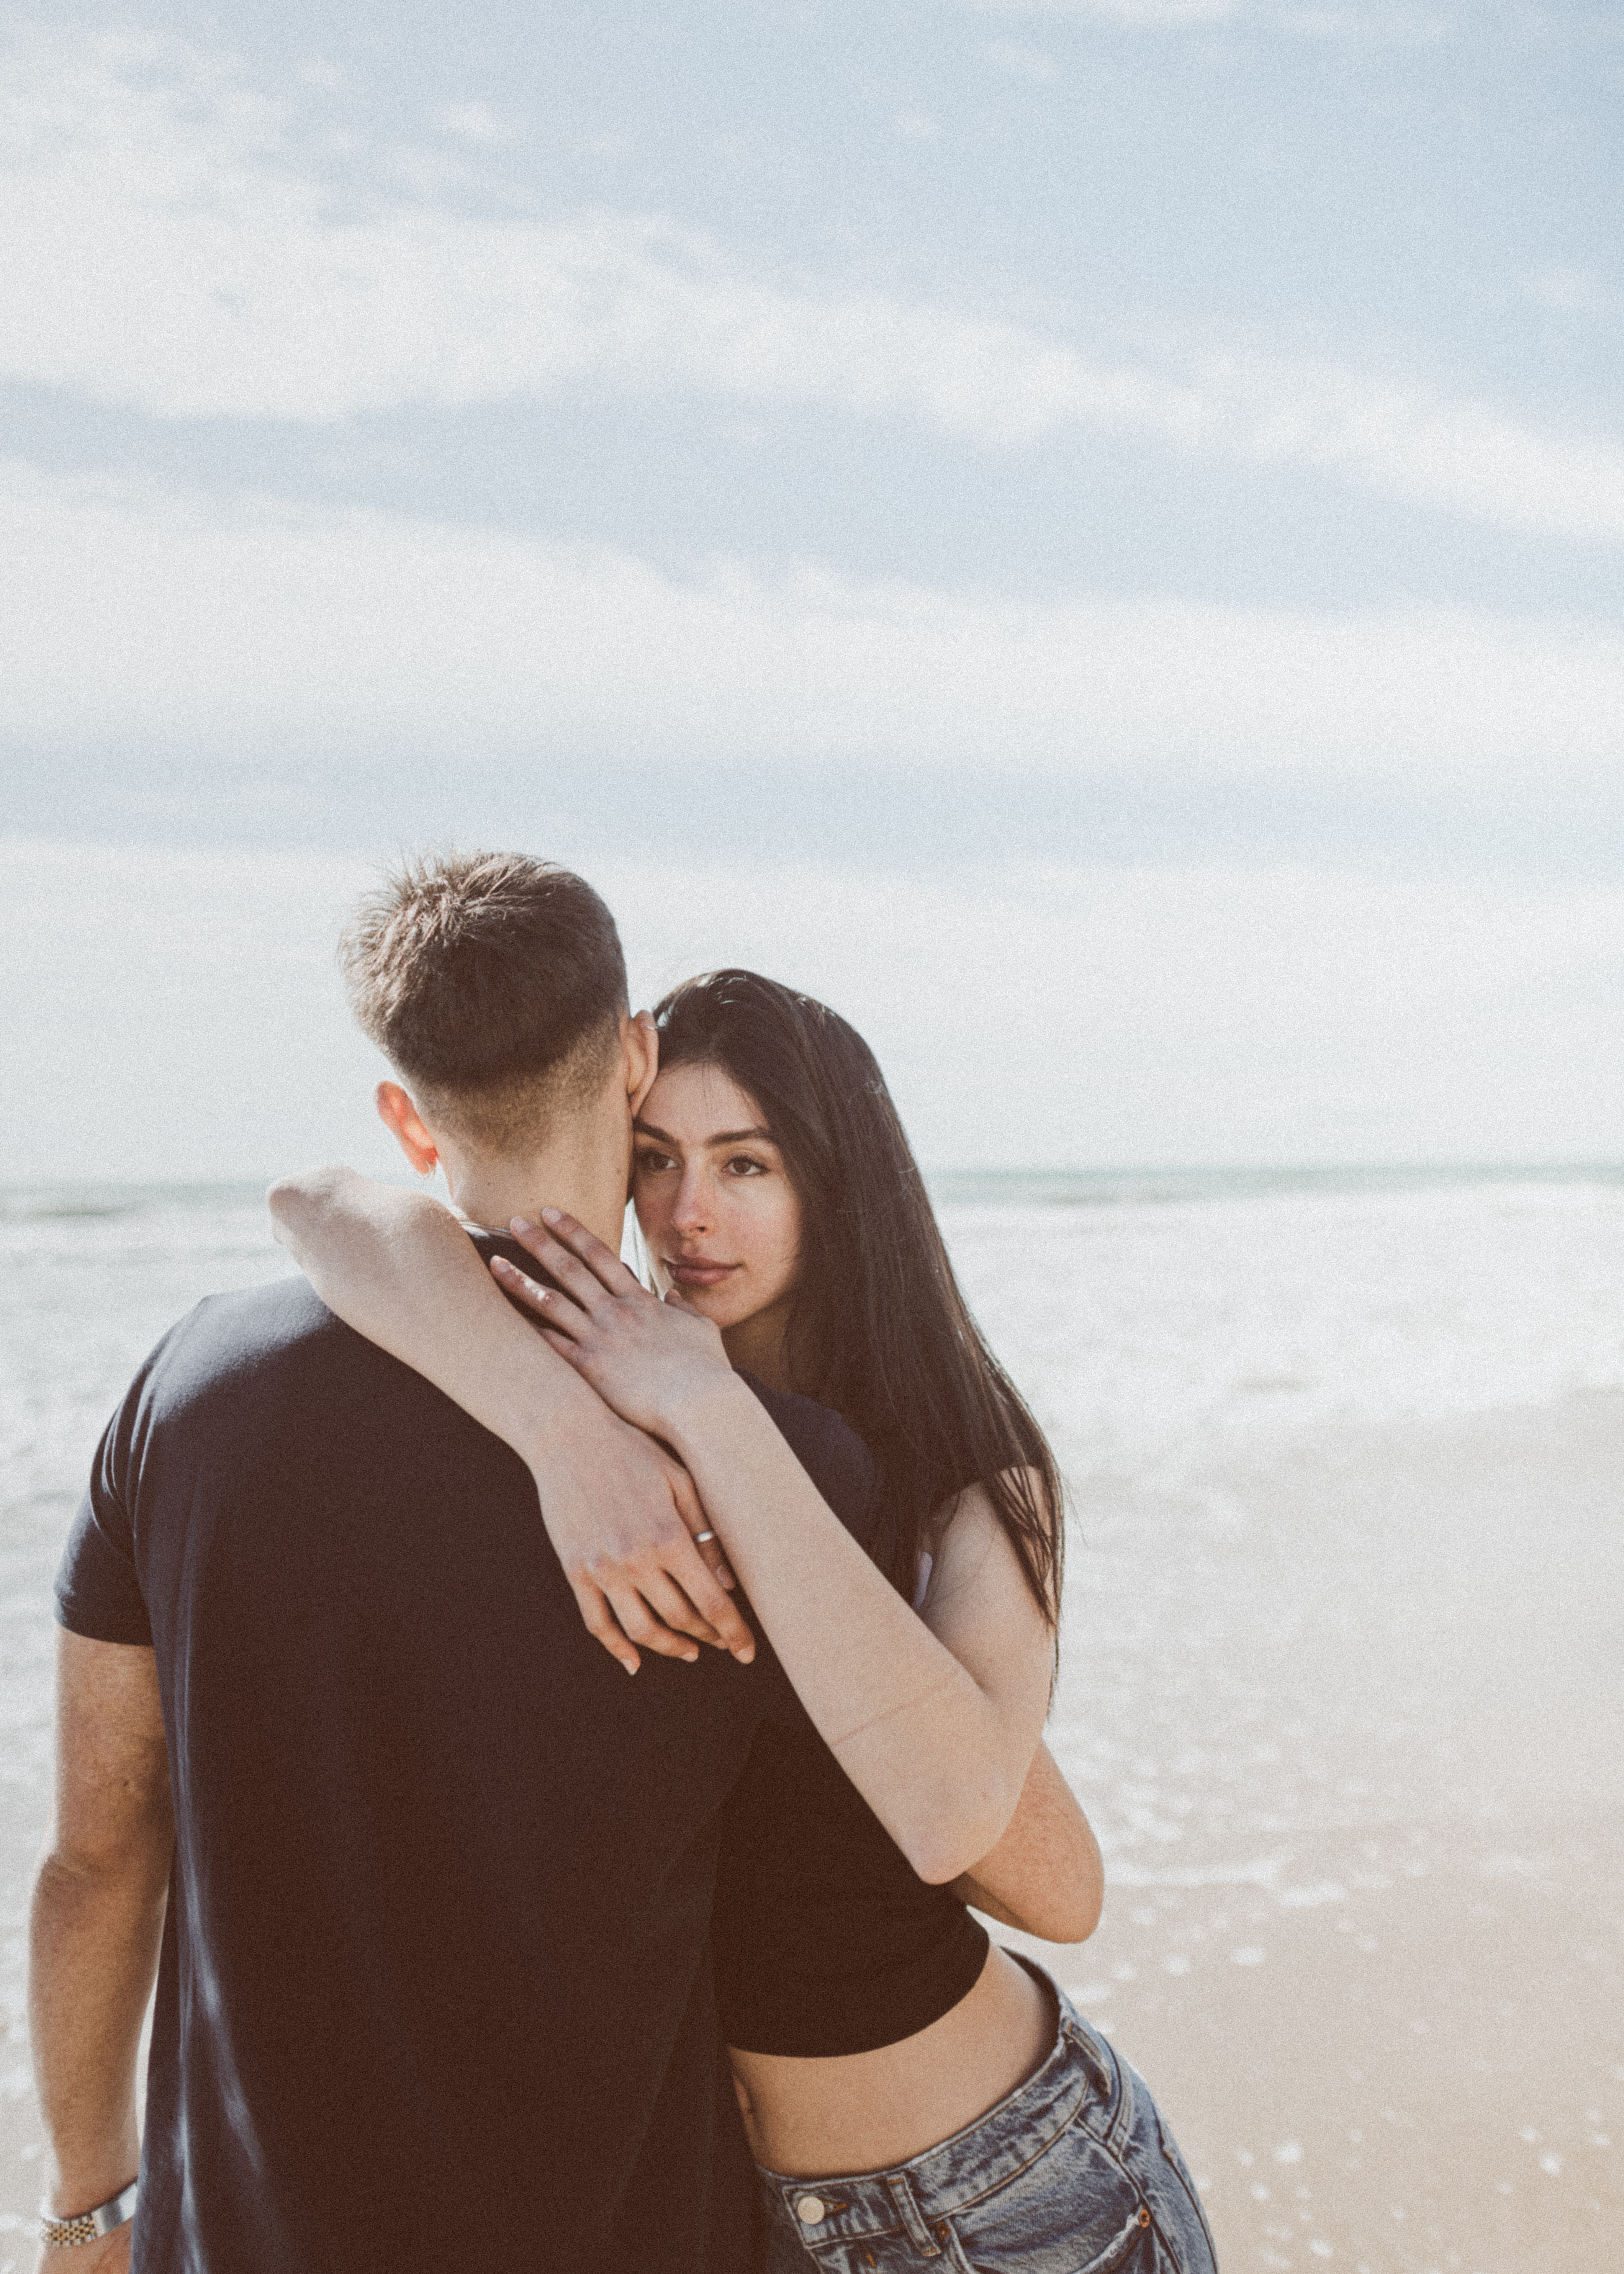 Oceanic Embrace: Editorial Couple Portraits on Sitges' Beaches